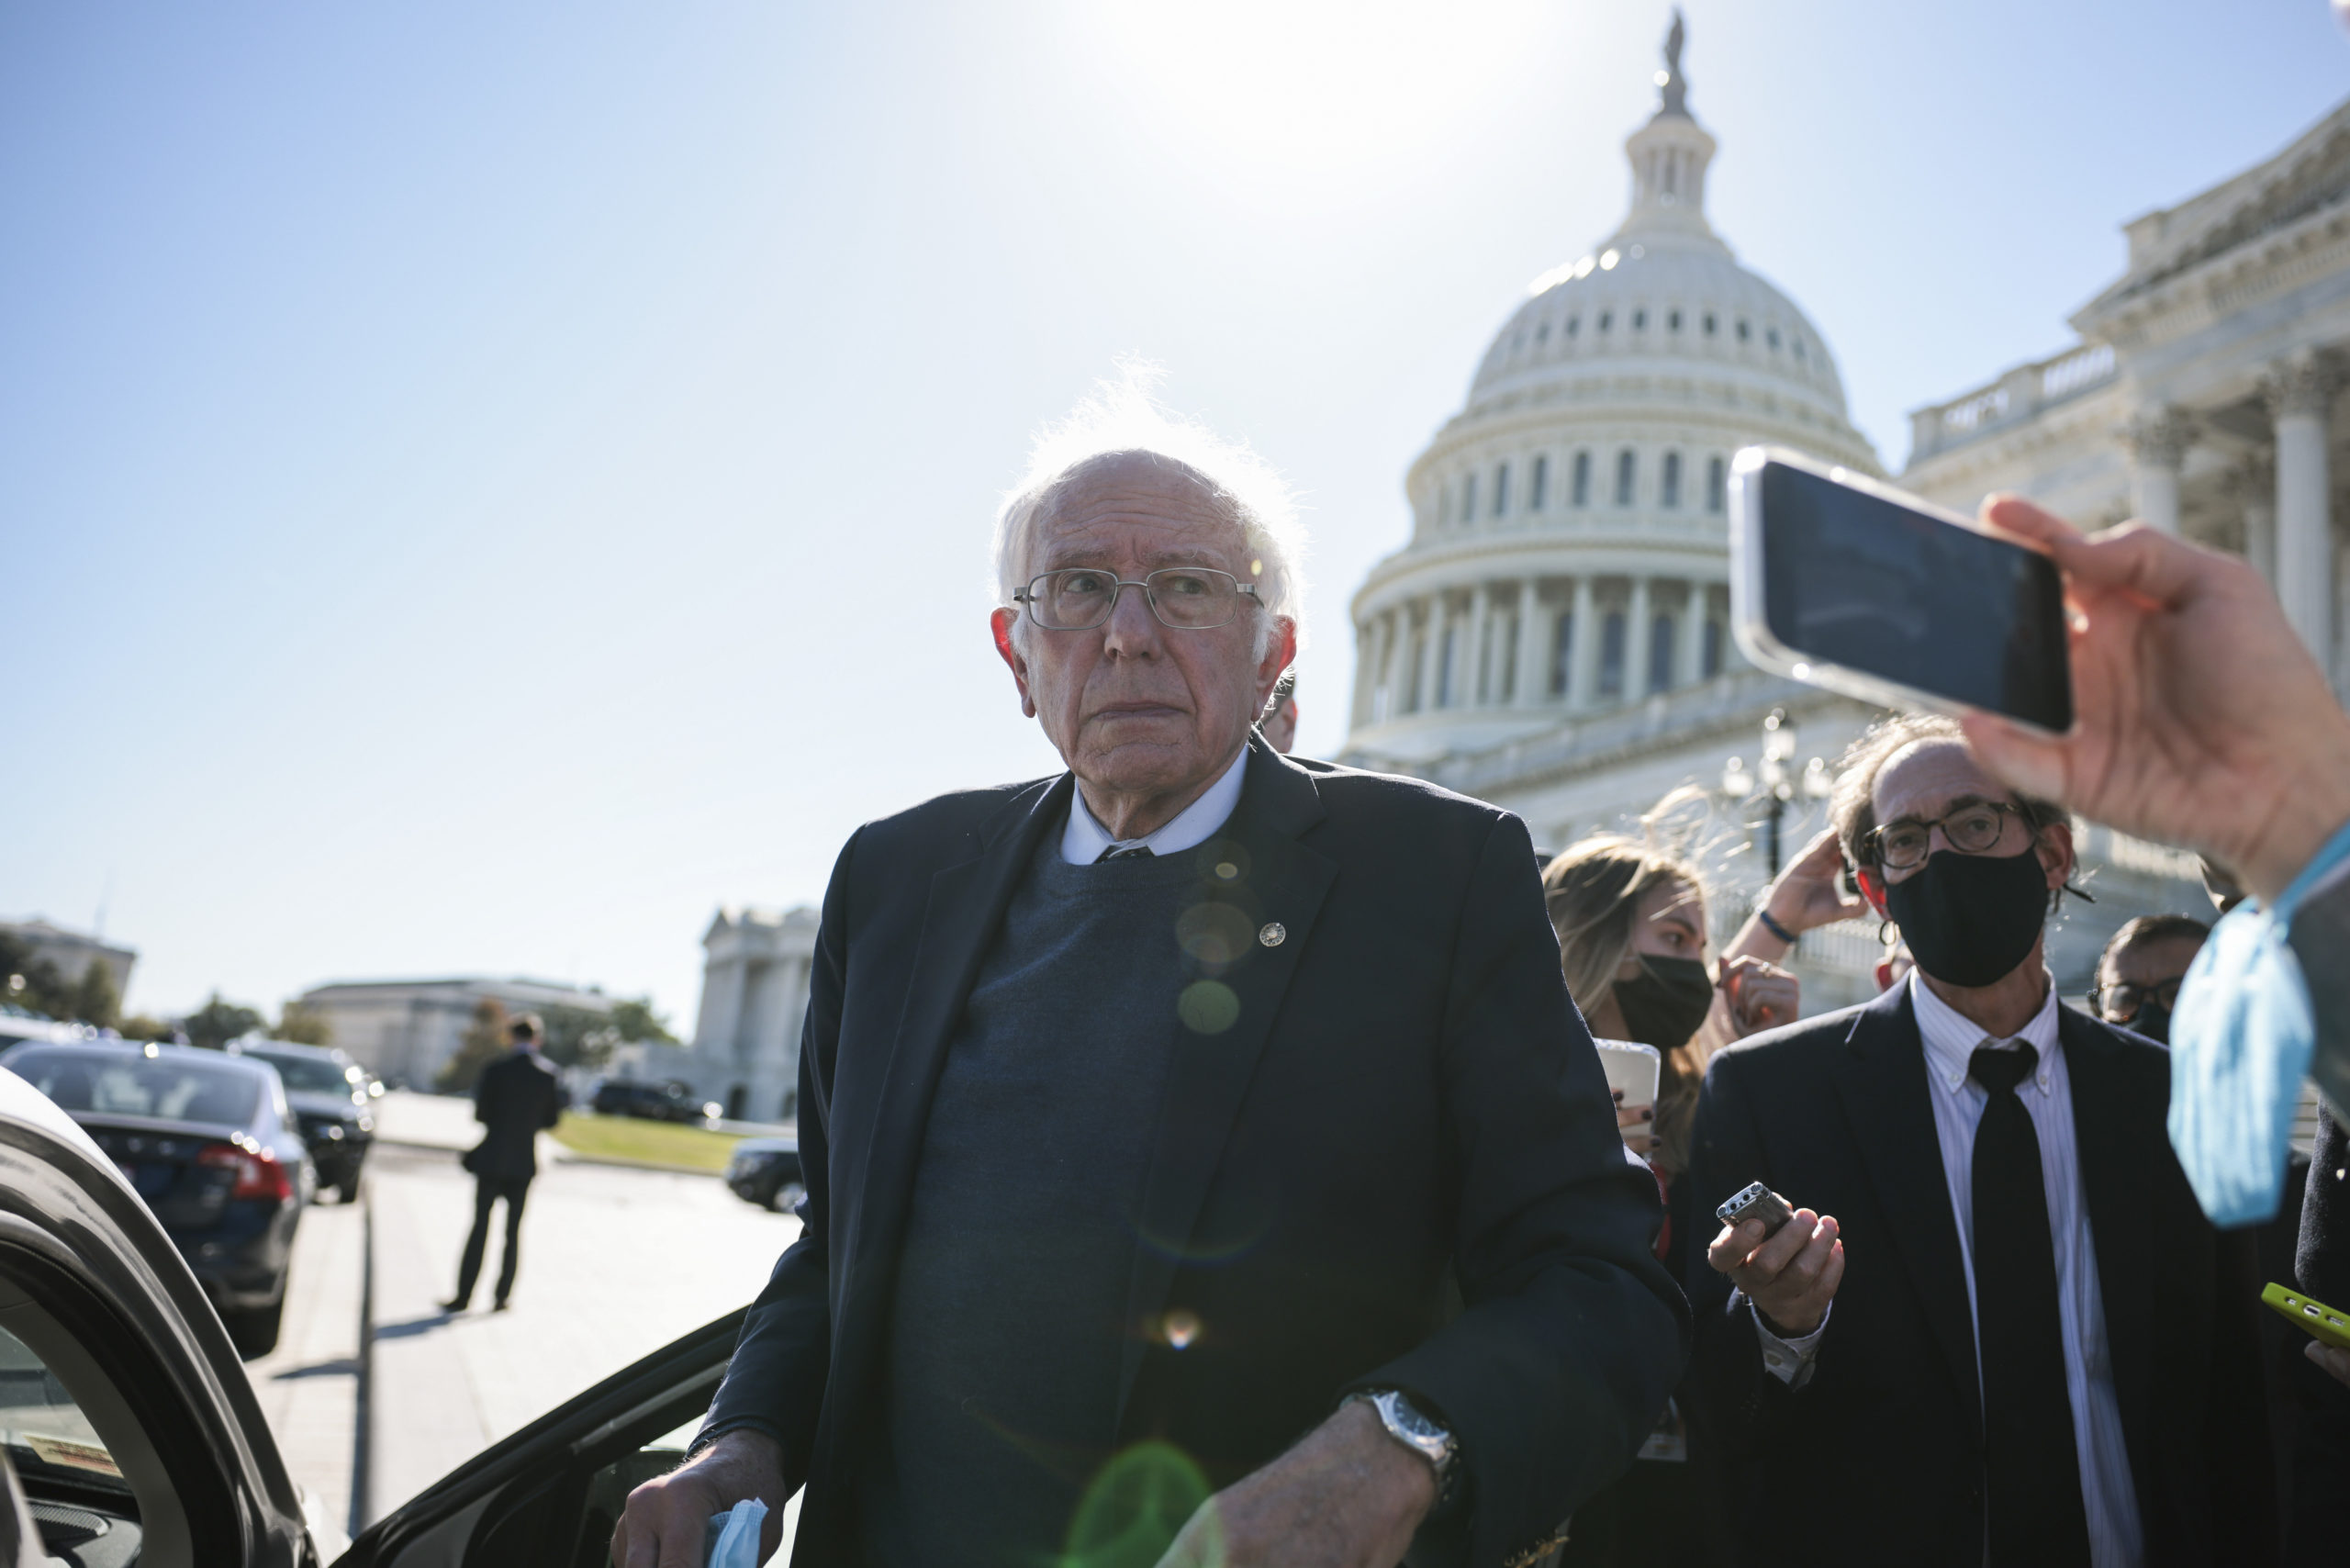 WASHINGTON, DC - OCTOBER 21: Sen. Bernie Sanders (I-VT) speaks with reporters as he leaves the U.S. Capitol Building following a vote on October 21, 2021 in Washington, DC. According to media reports the White House and Congress have trimmed the cost of President Biden's Build Back Better plan from $3.5 trillion to less than $2 trillion, as negotiations continue. (Photo by Anna Moneymaker/Getty Images)